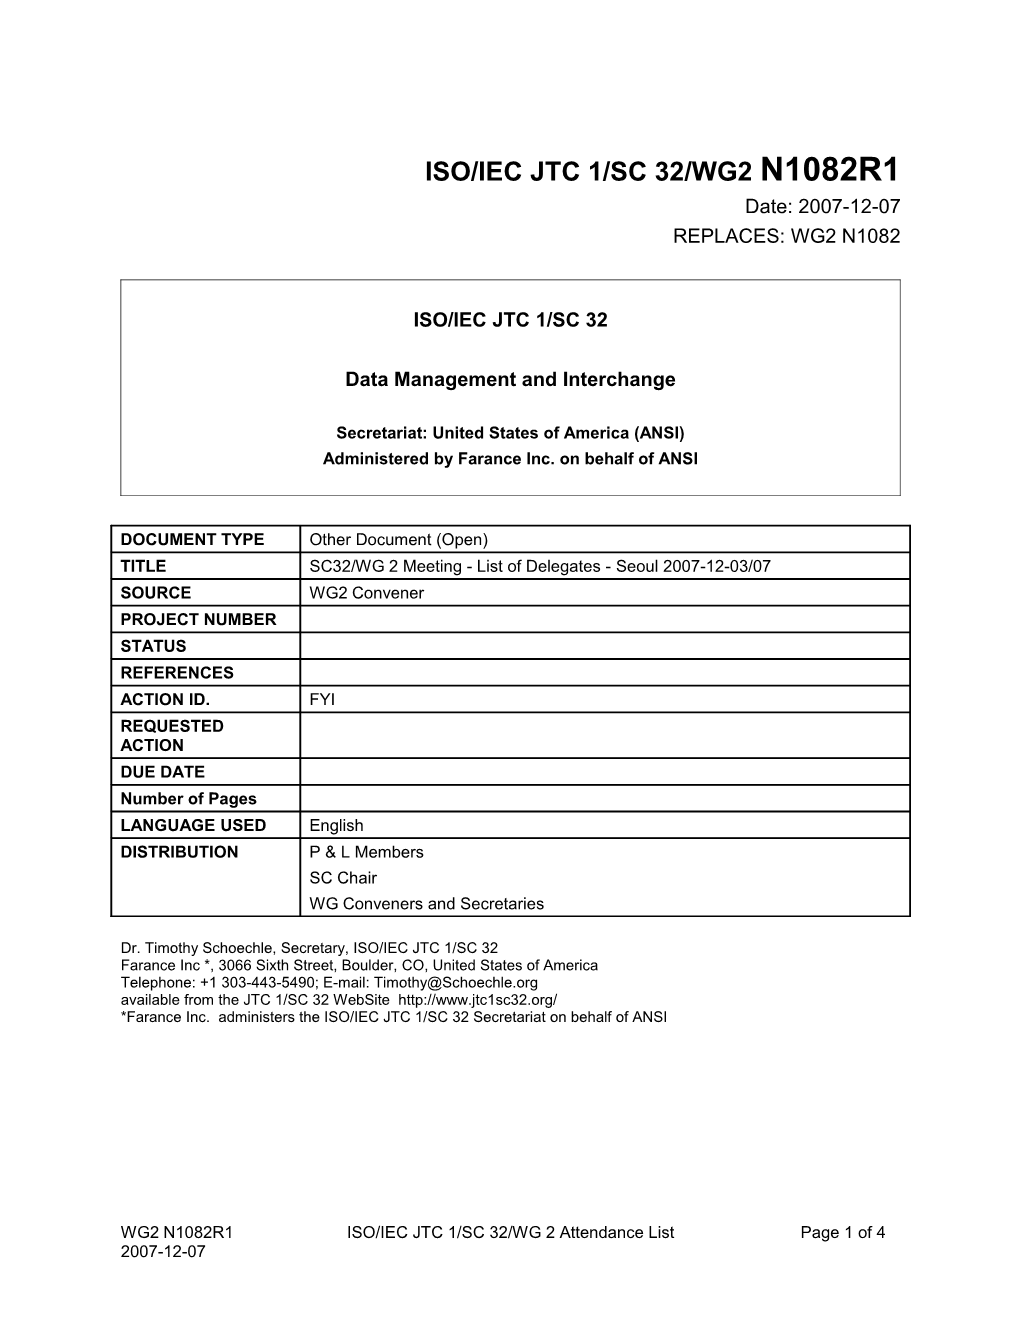 JTC 1/SC 32 Meeting Attendees Template